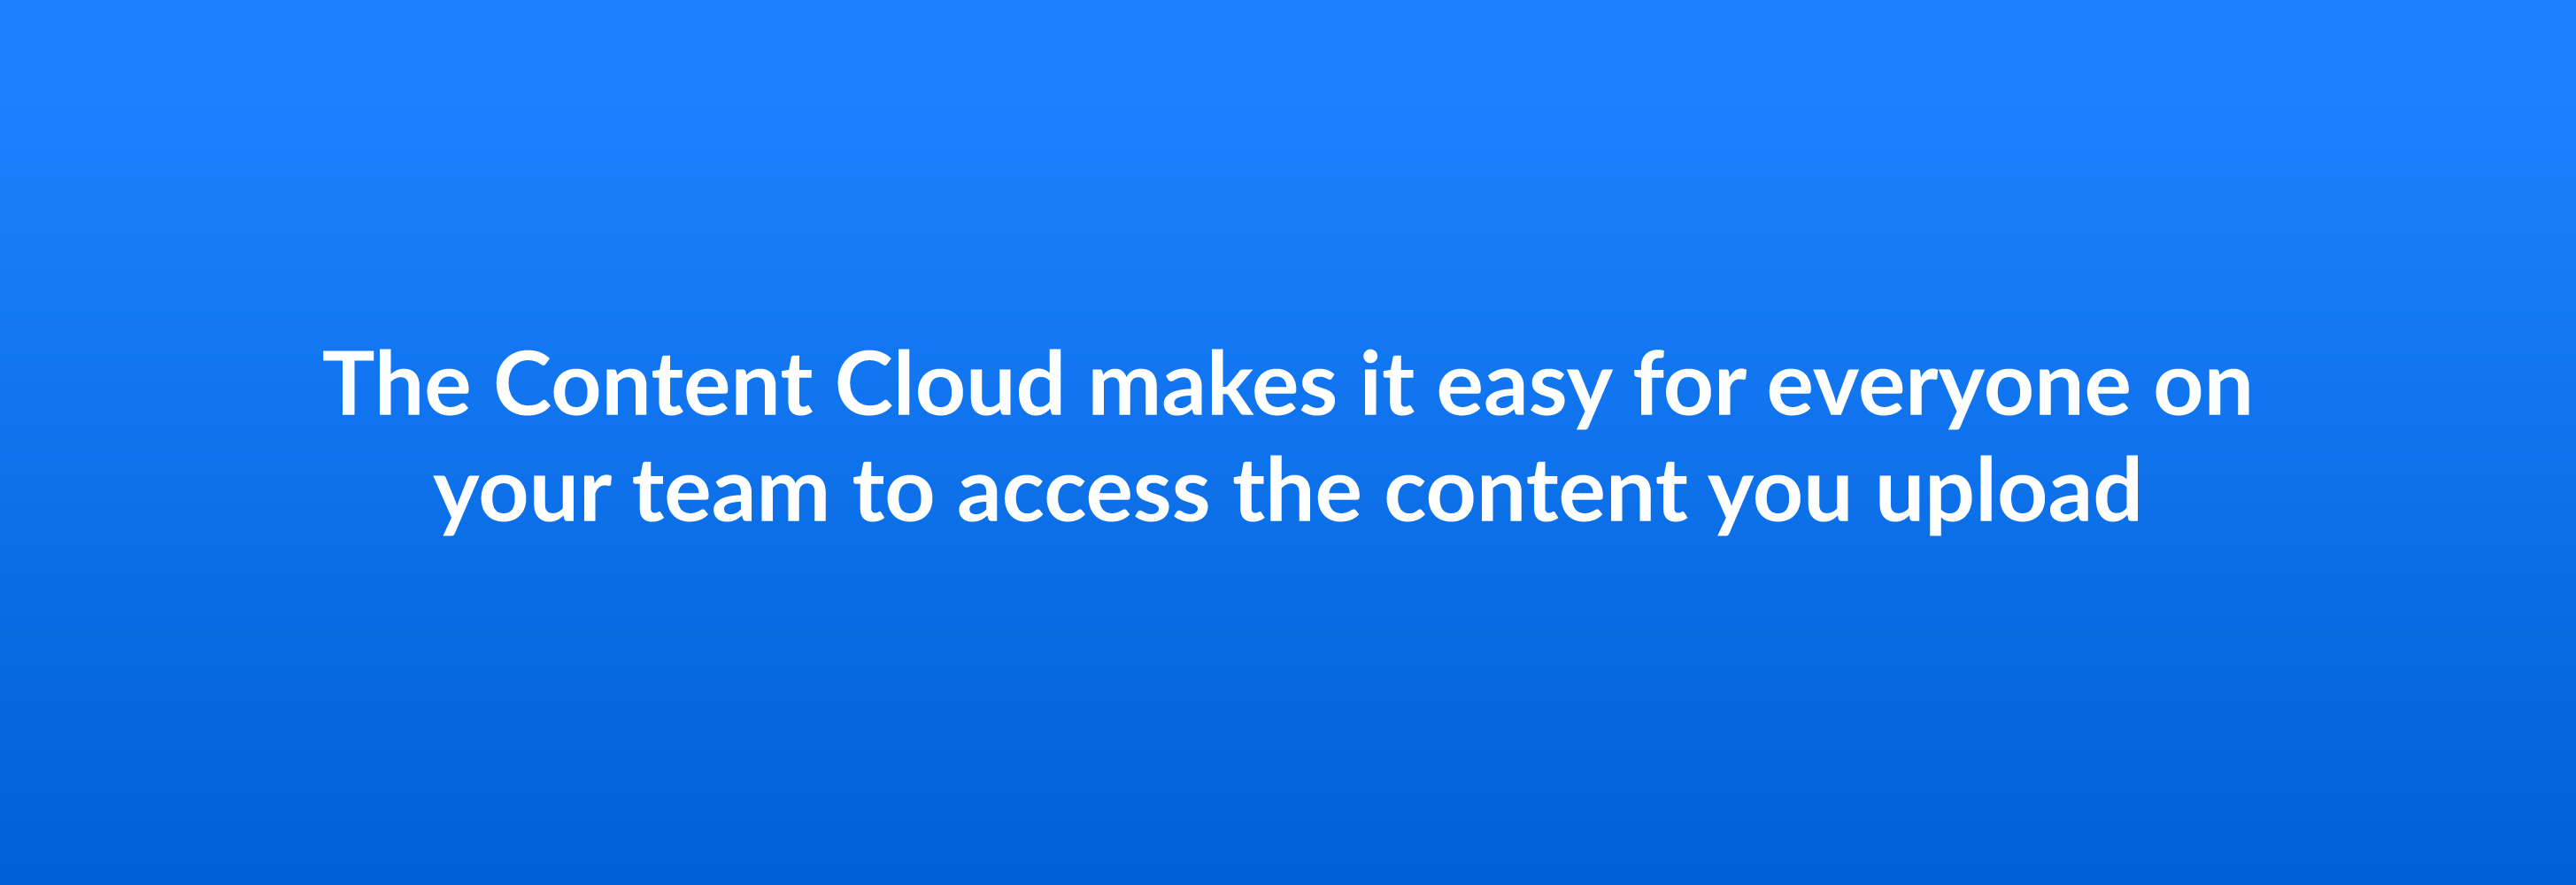 The Content Cloud makes it easy for everyone on your team to access the content you upload